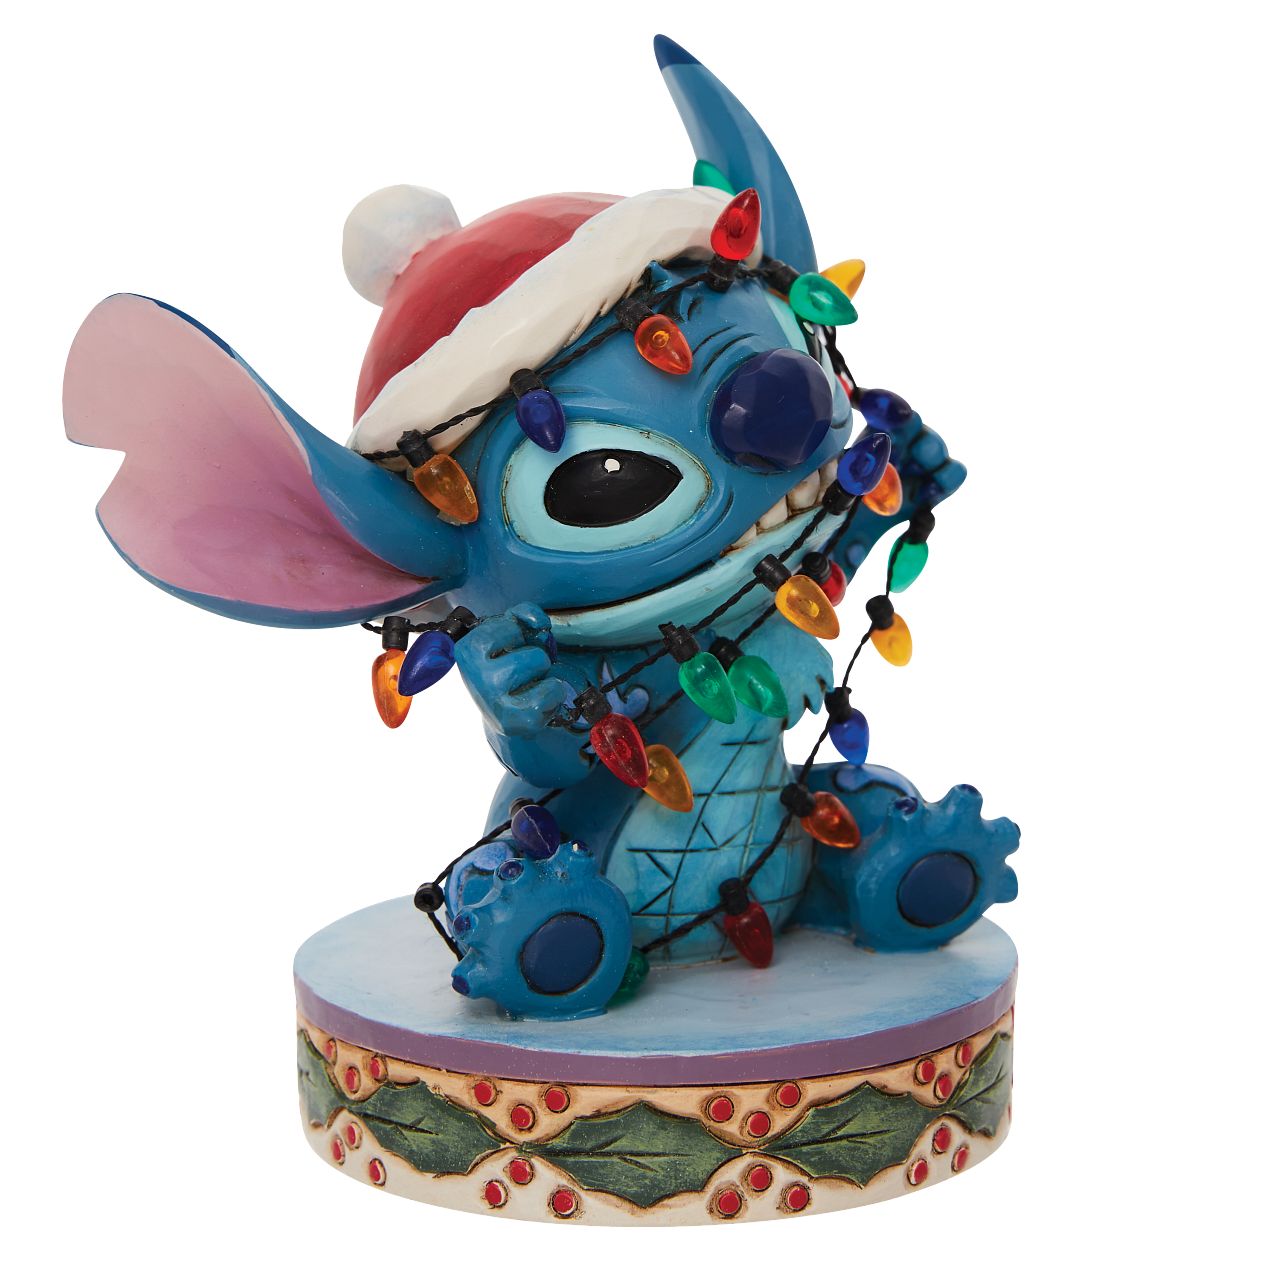 Stitch Wrapped in Lights Figurine  Disney comes home for the holidays with this festive figurine by Jim Shore. Attempting to help his Ohana decorate, Stitch gets caught up in Christmas preparations. Tangled in lights, the little alien tries to escape while wearing a Santa hat.